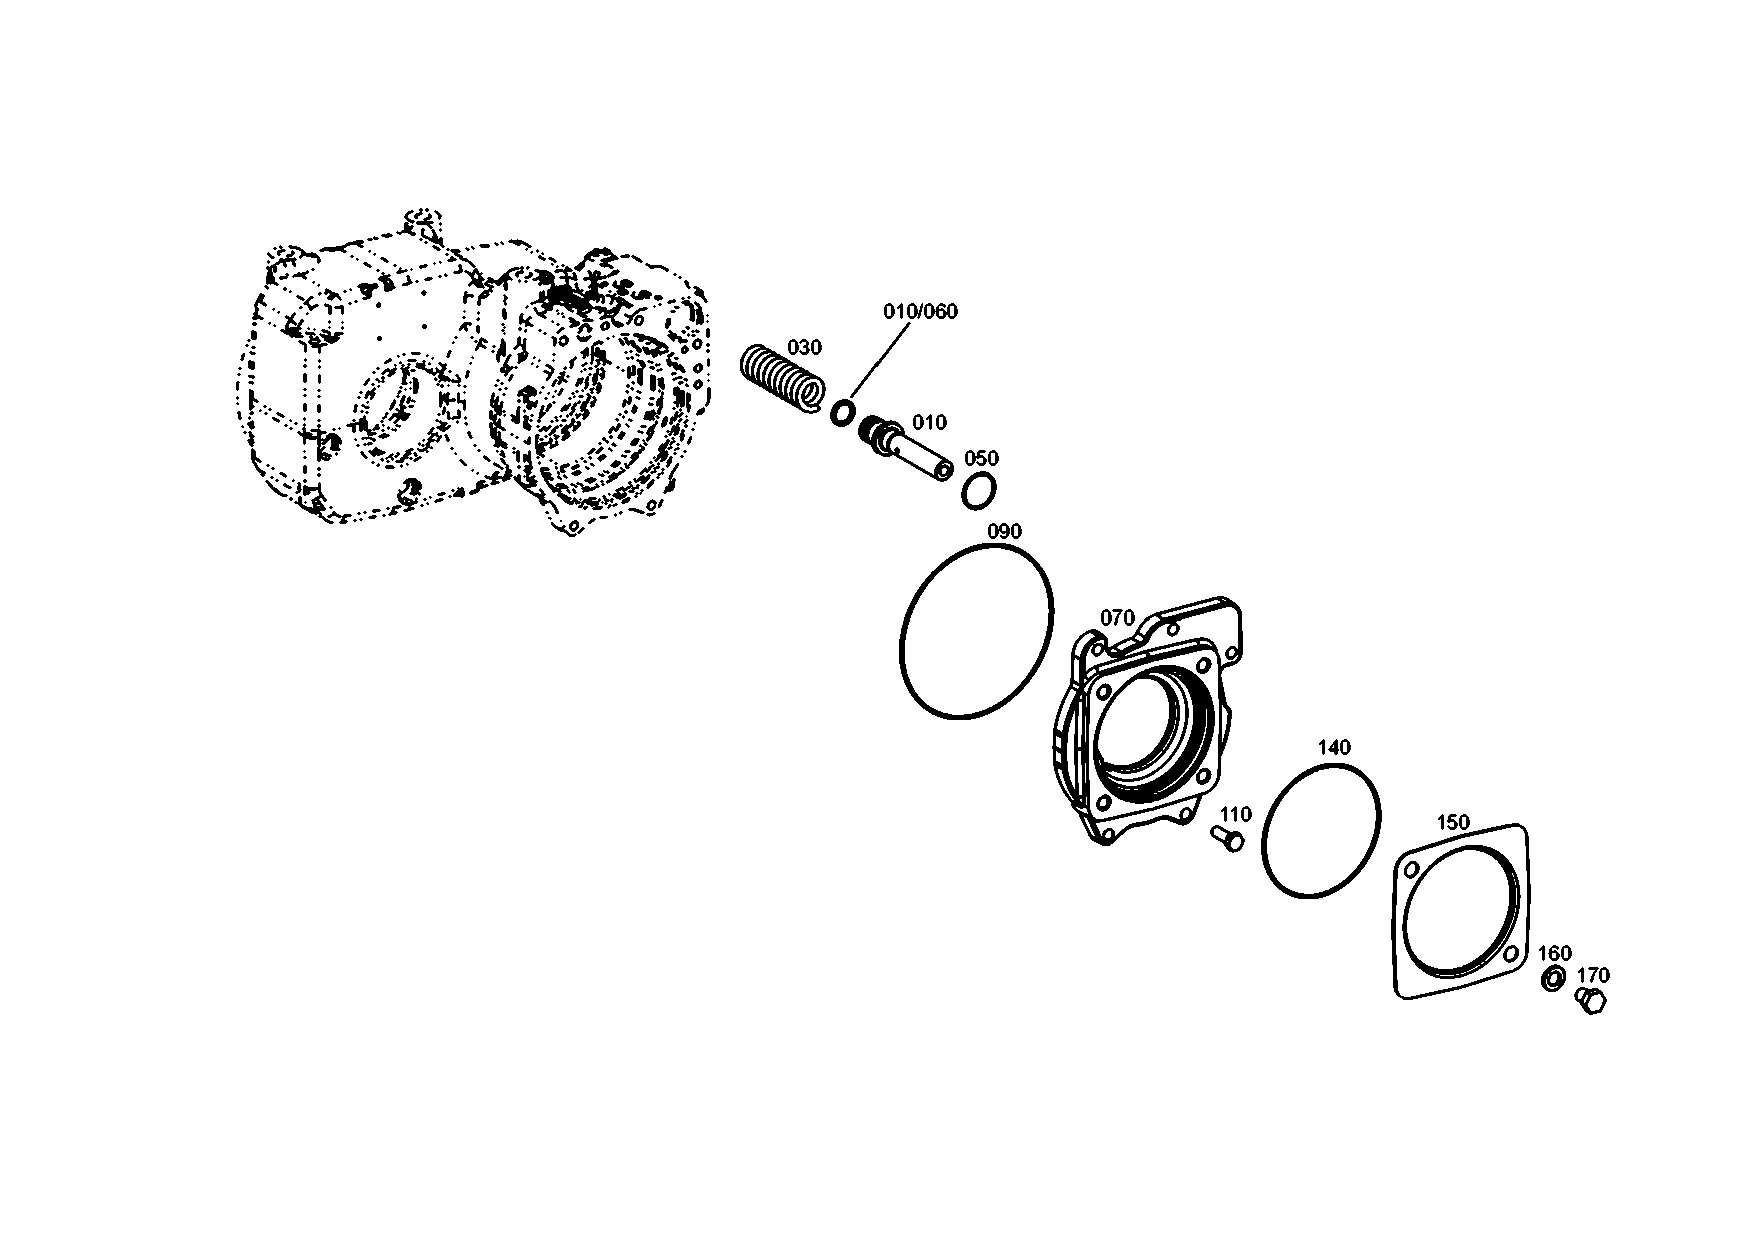 drawing for E. N. M. T. P. / CPG 4143 201 021 - PISTON (figure 3)